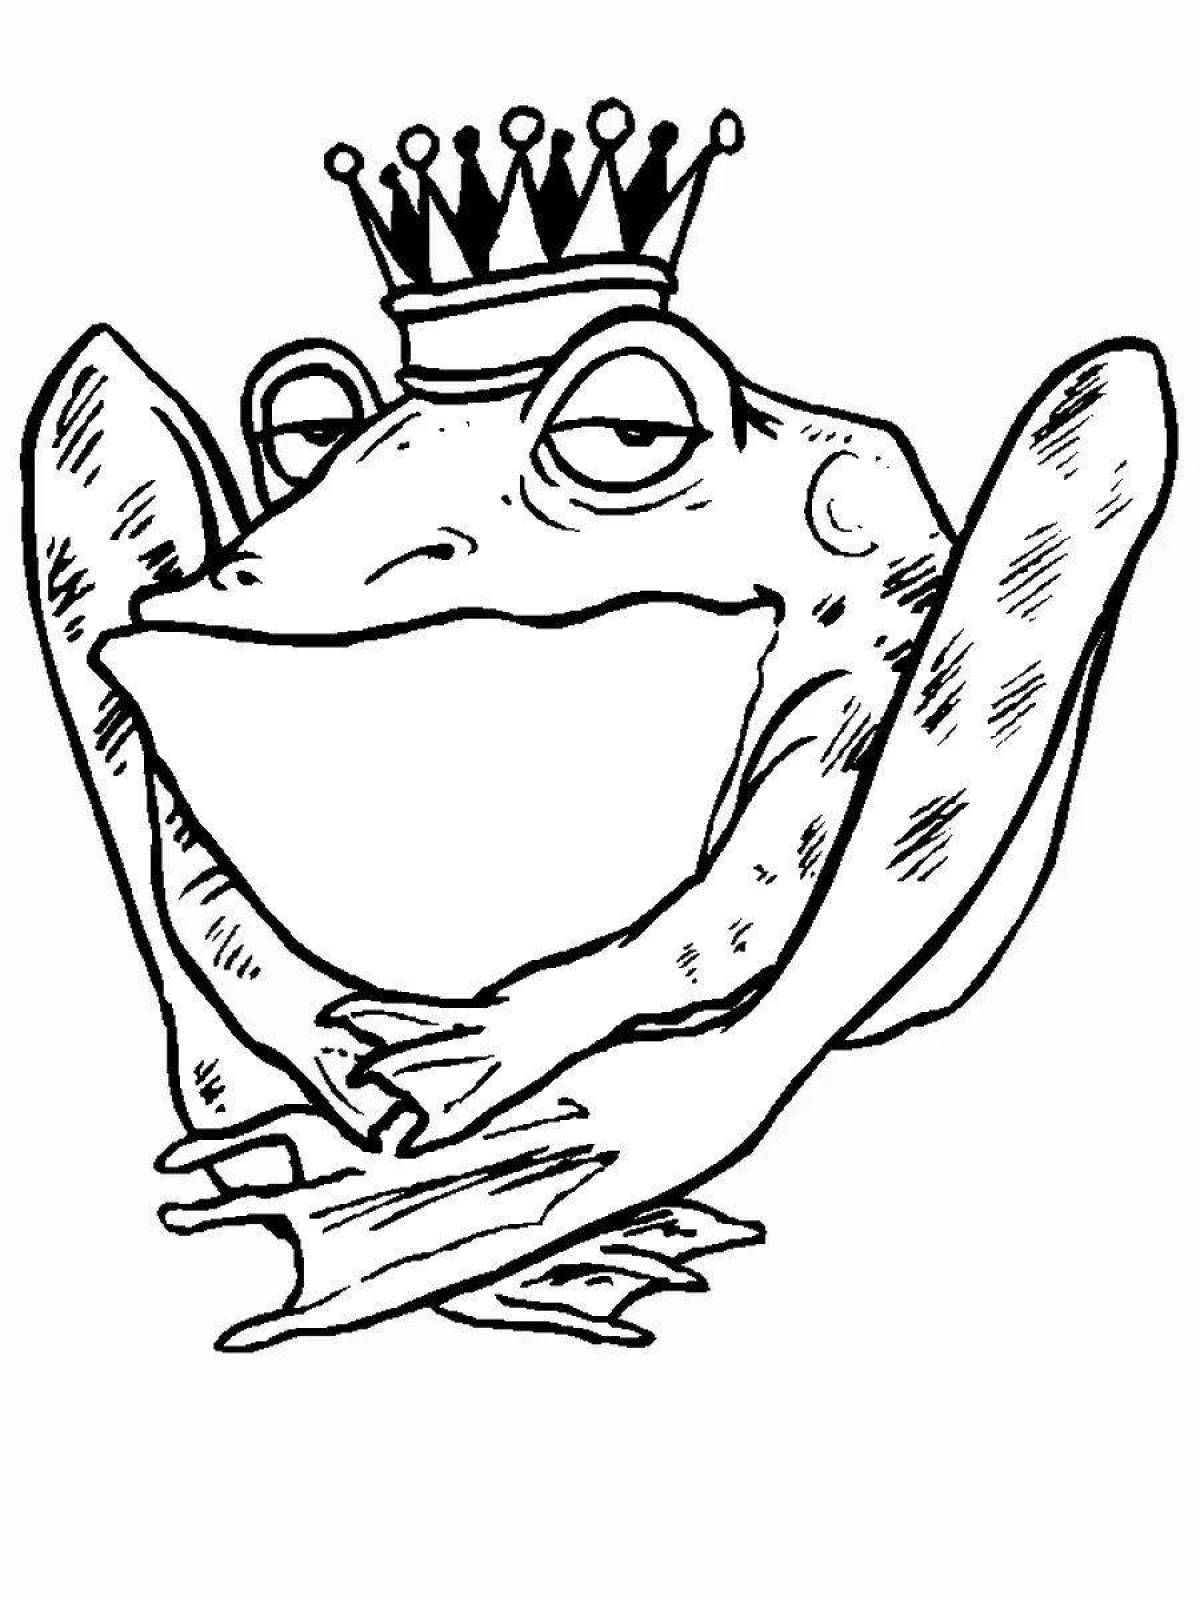 Joyful frog coloring pages